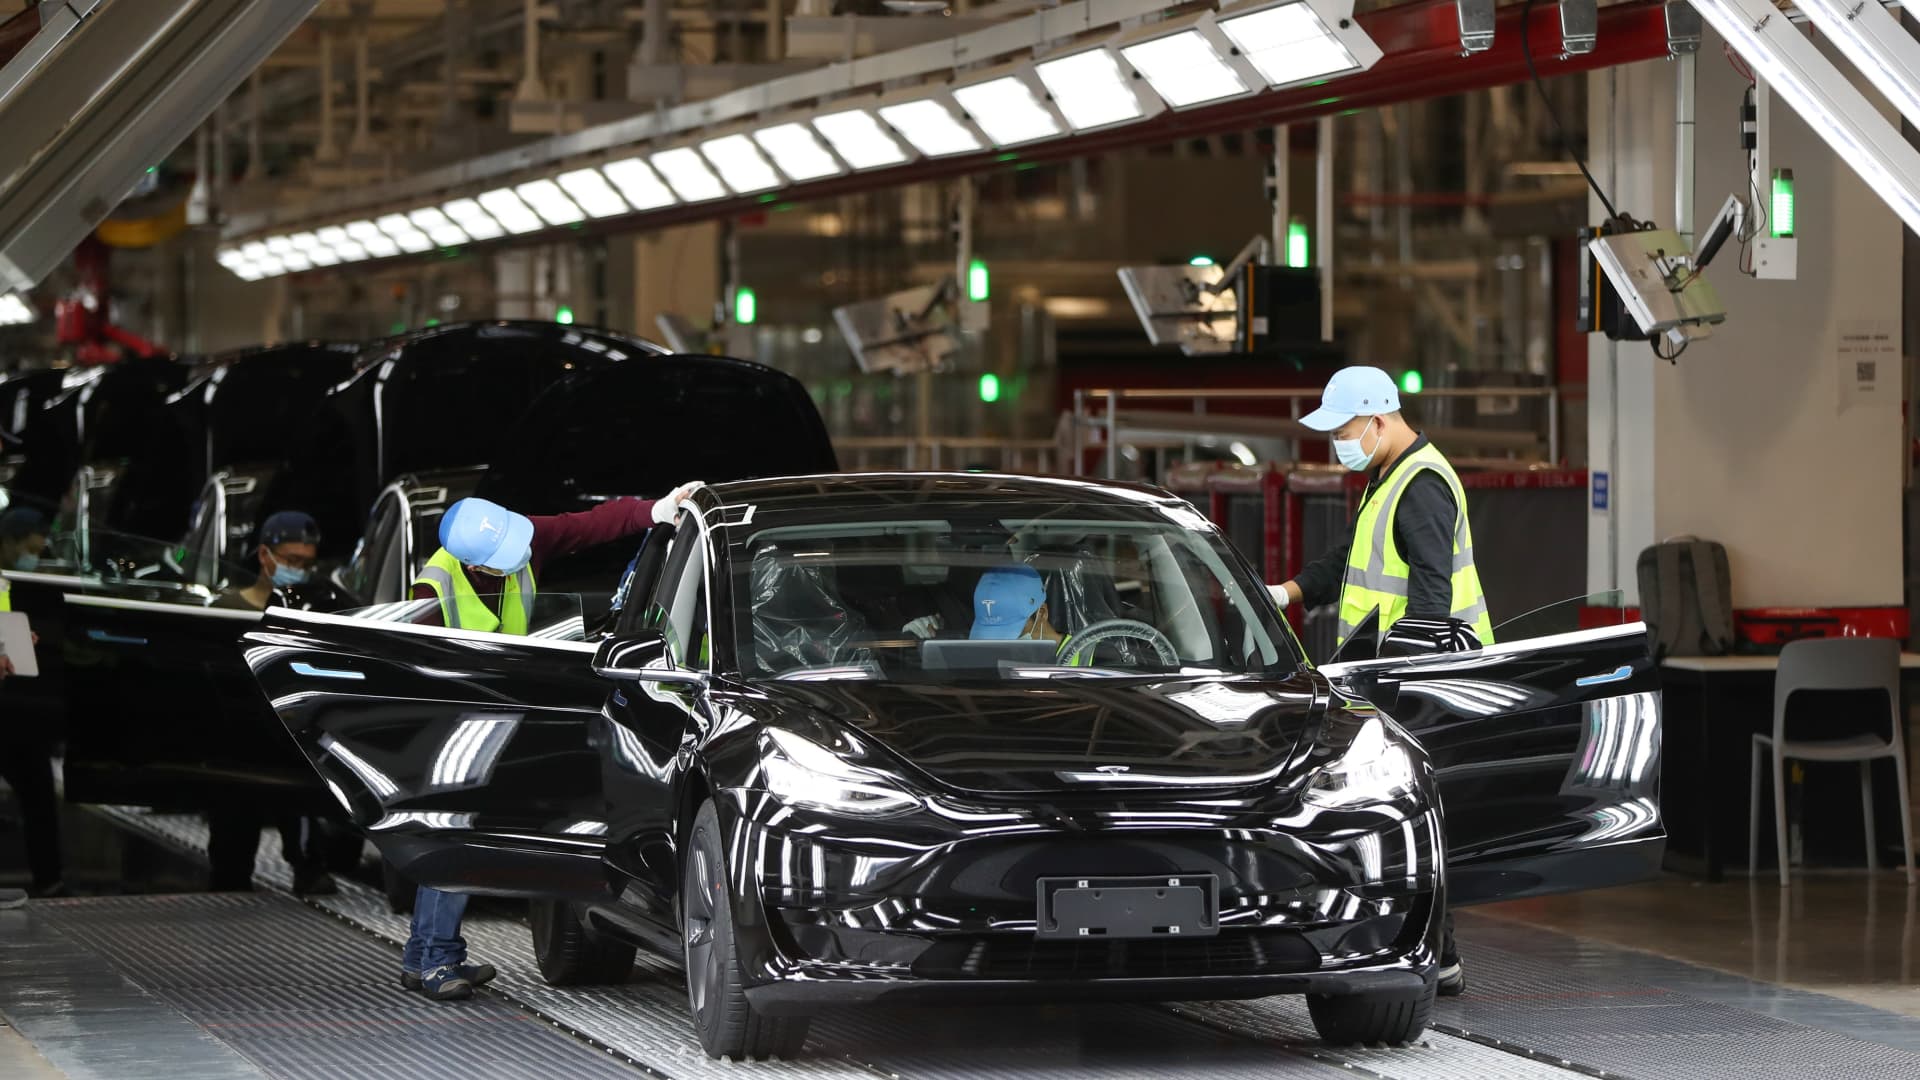 Employees work at the Tesla Gigafactory in Shanghai, east China, Nov. 20, 2020. U.S. electric car company Tesla in 2019 built its first Gigafactory outside the United States in the new Lingang area, with a designed annual production capacity of 500,000 units.